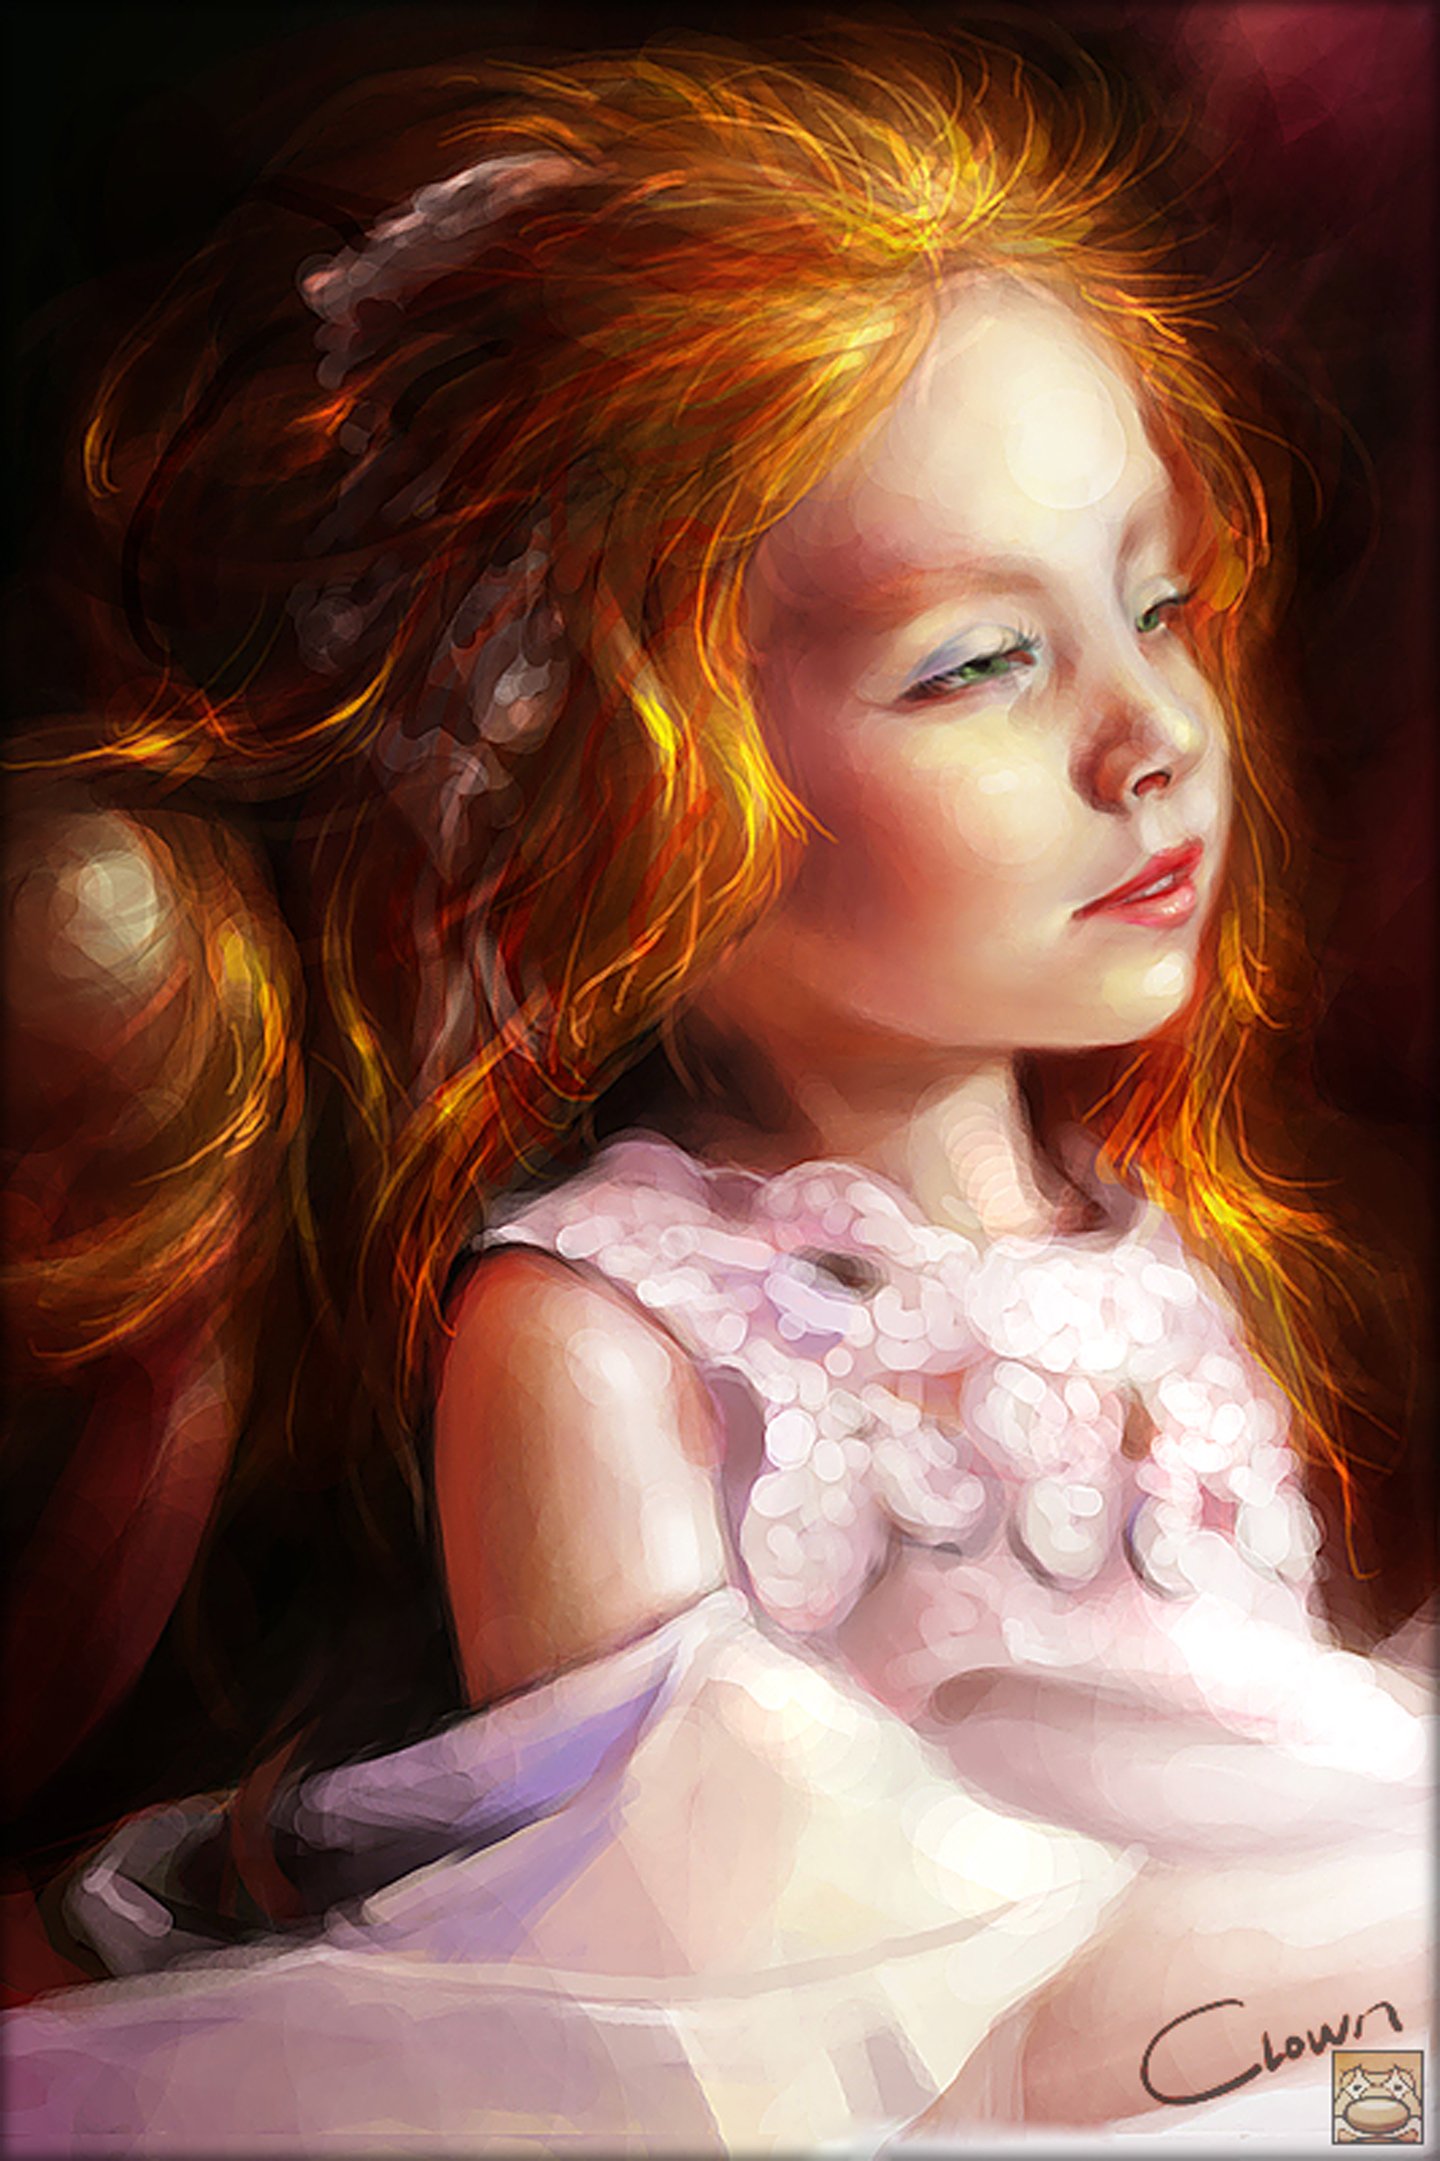 little, Girl, 2d, Realism, Kid, Child, Portrait, Face, Painting, Red, Hair, Beautiful, Pretty, Dress Wallpaper